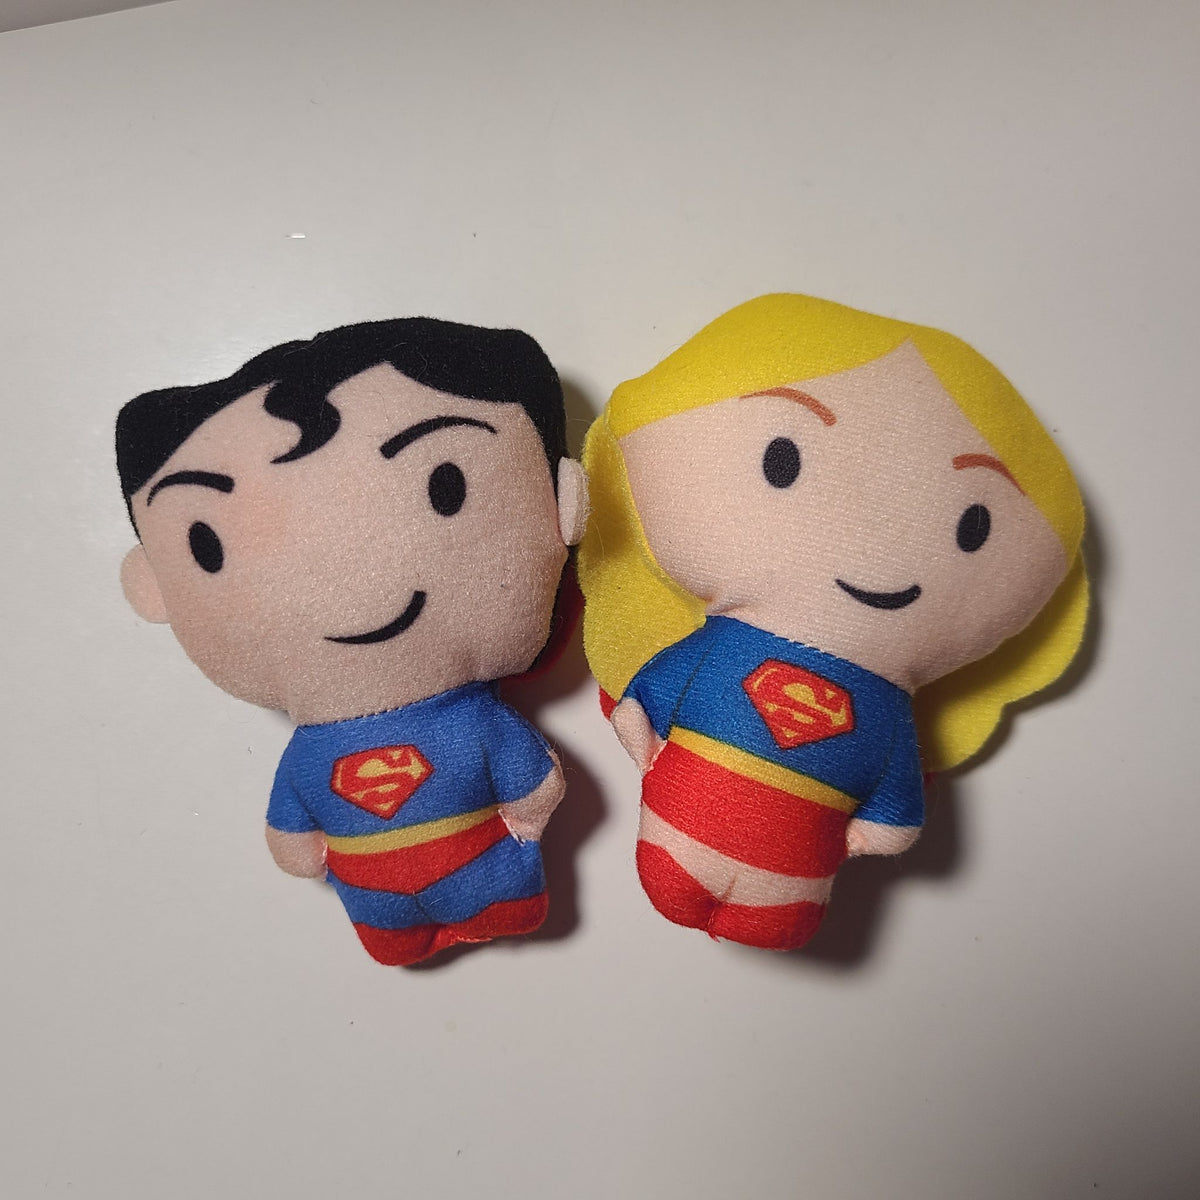 Superman &amp; Supergirl (Set of 2) - Justice League DC Super Heroes by McDonalds Happy Meal Toys 2021 - 1